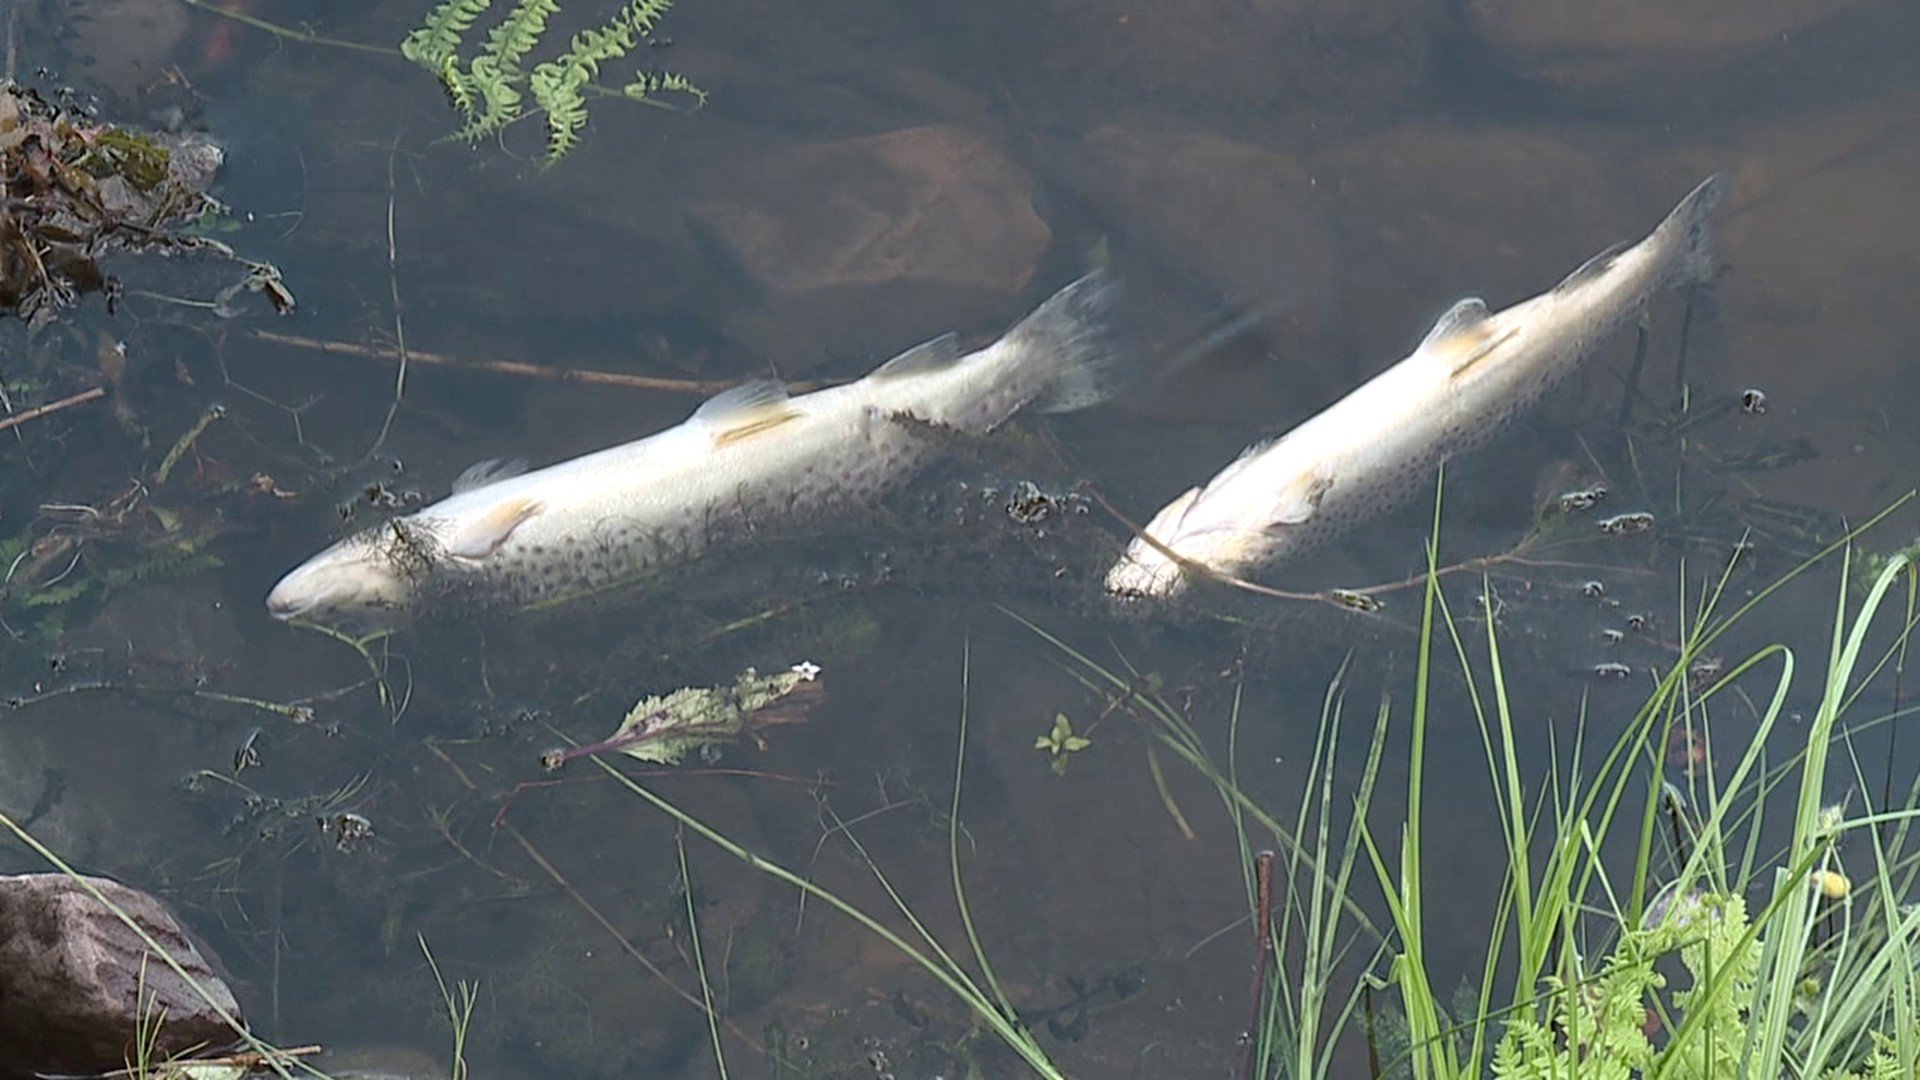 Dozens of dead fish have washed ashore at Moon Lake State Forest, and Newswatch 16's Jack Culkin spoke with fishermen who say they've never seen anything like it.